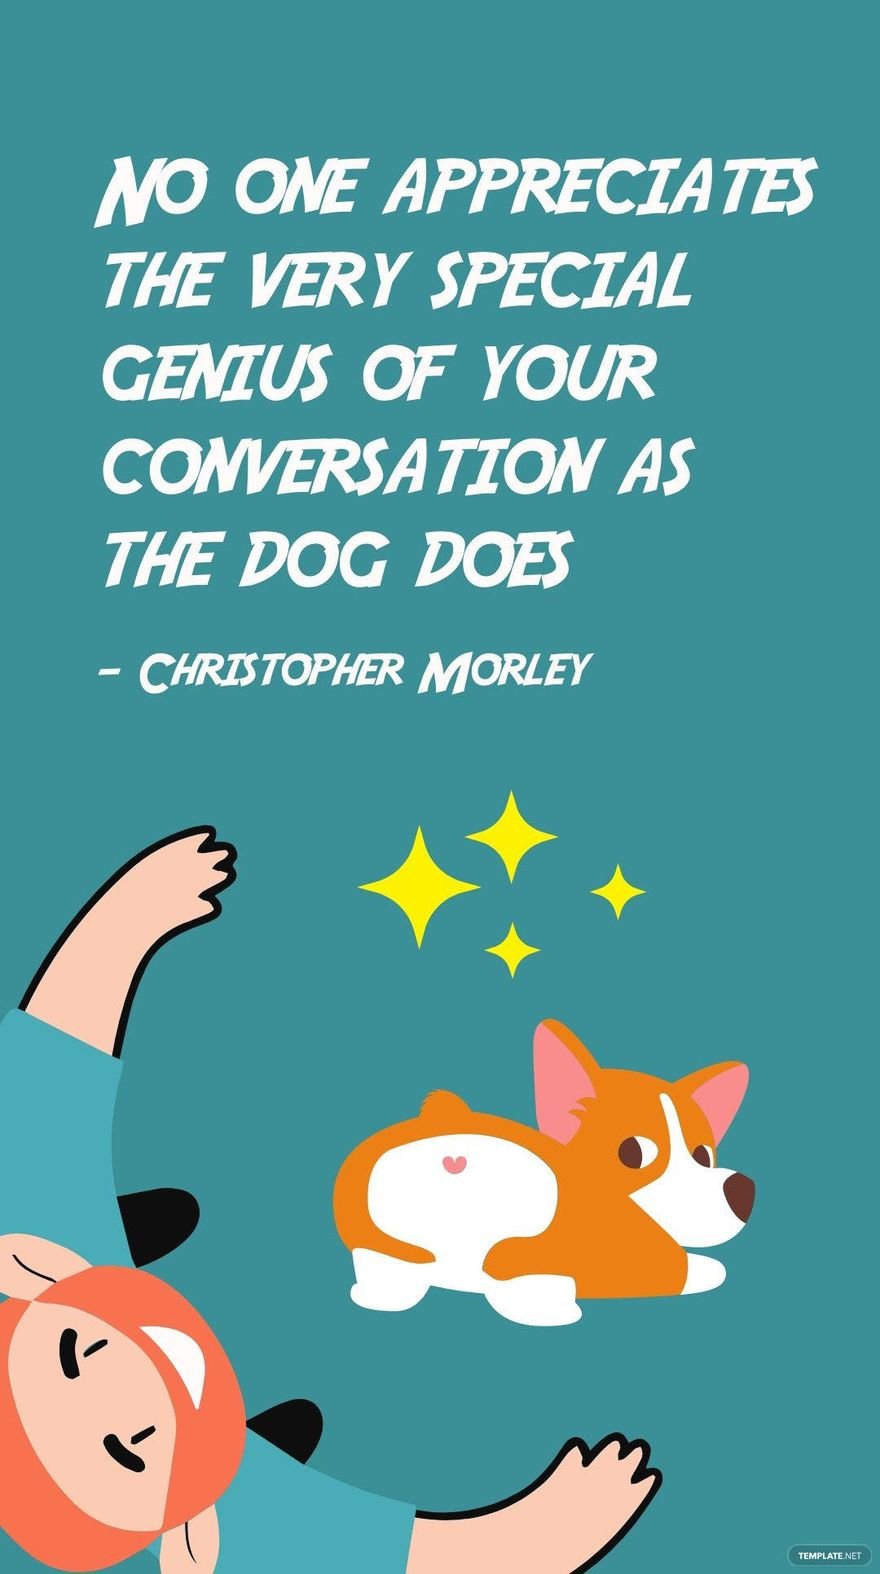 Christopher Morley - No one appreciates the very special genius of your conversation as the dog does